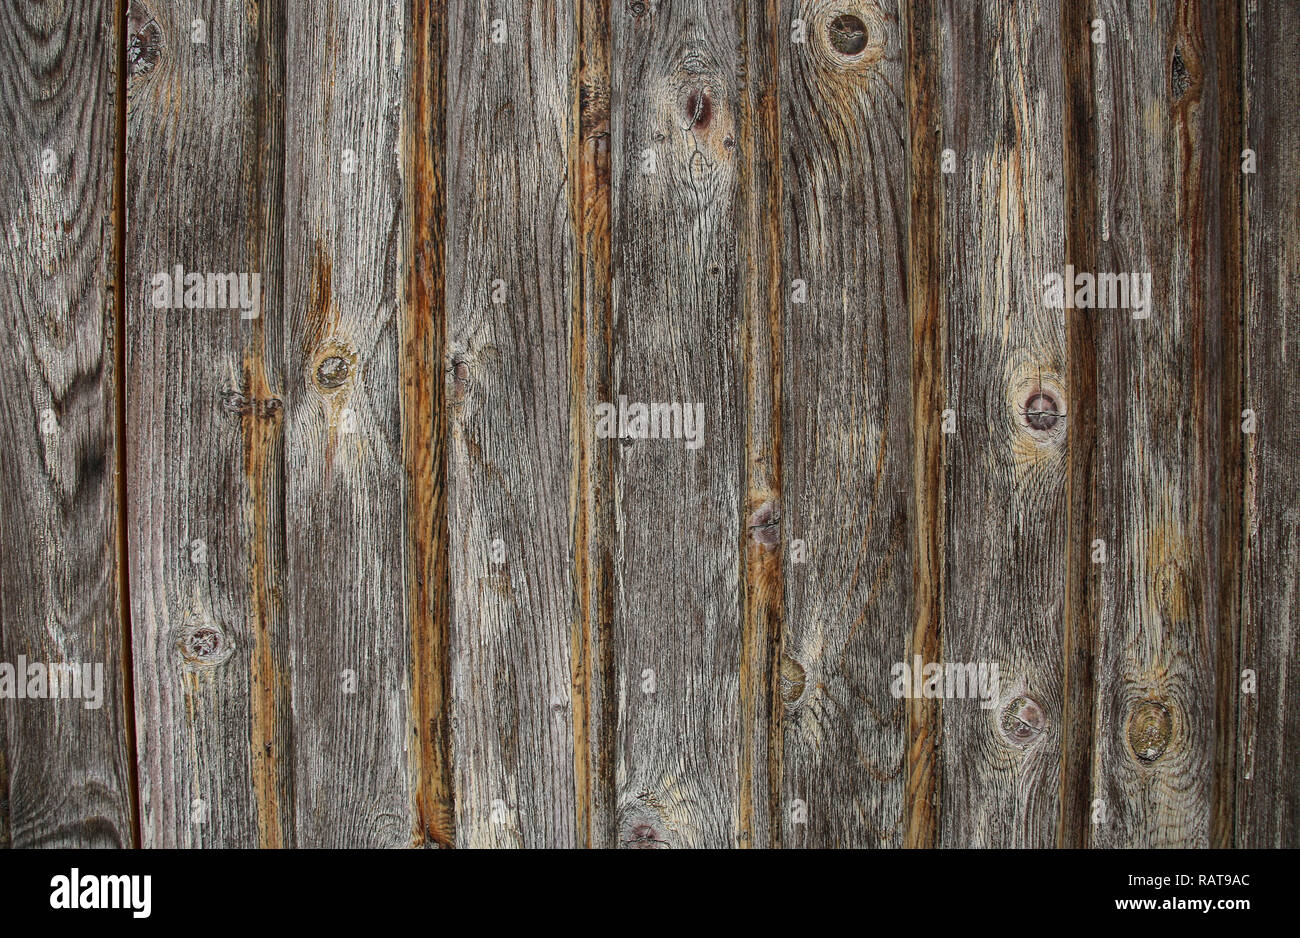 Wooden Wall Texture Wood Background Stock Photo Alamy